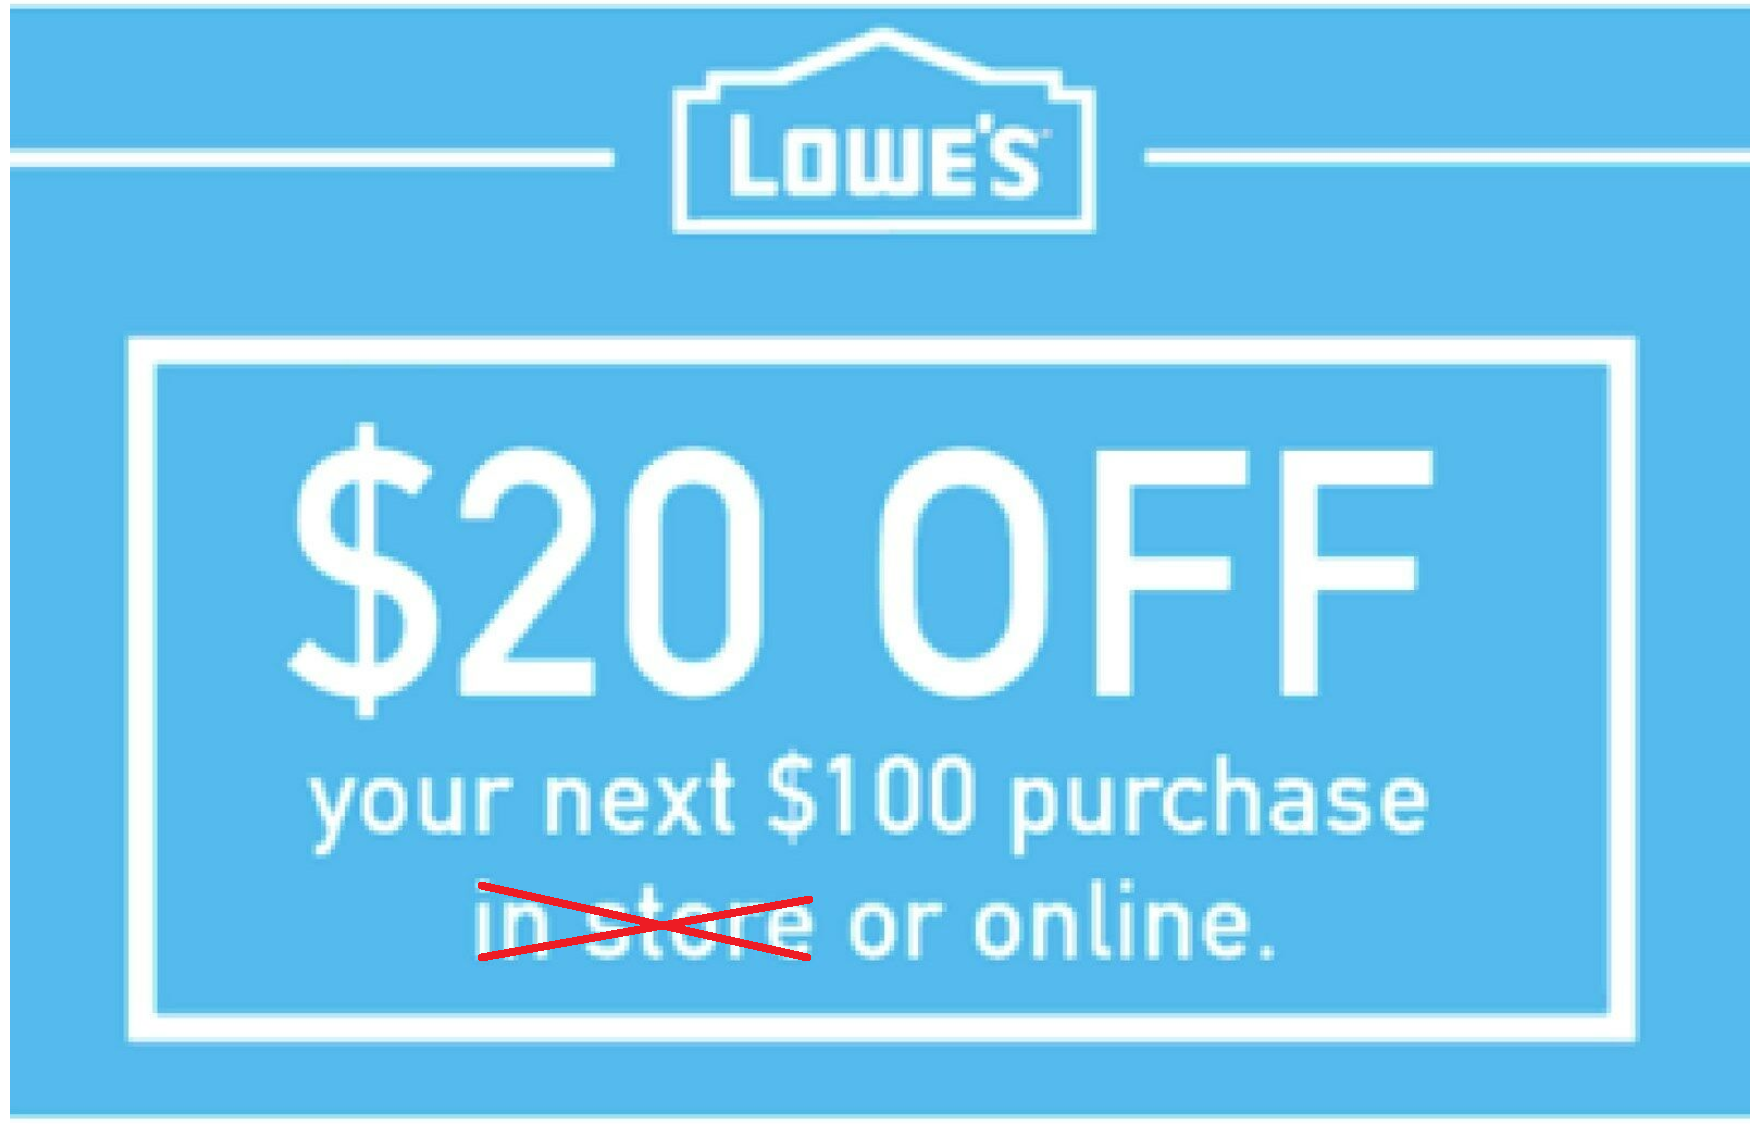 lowes coupon barcode generator